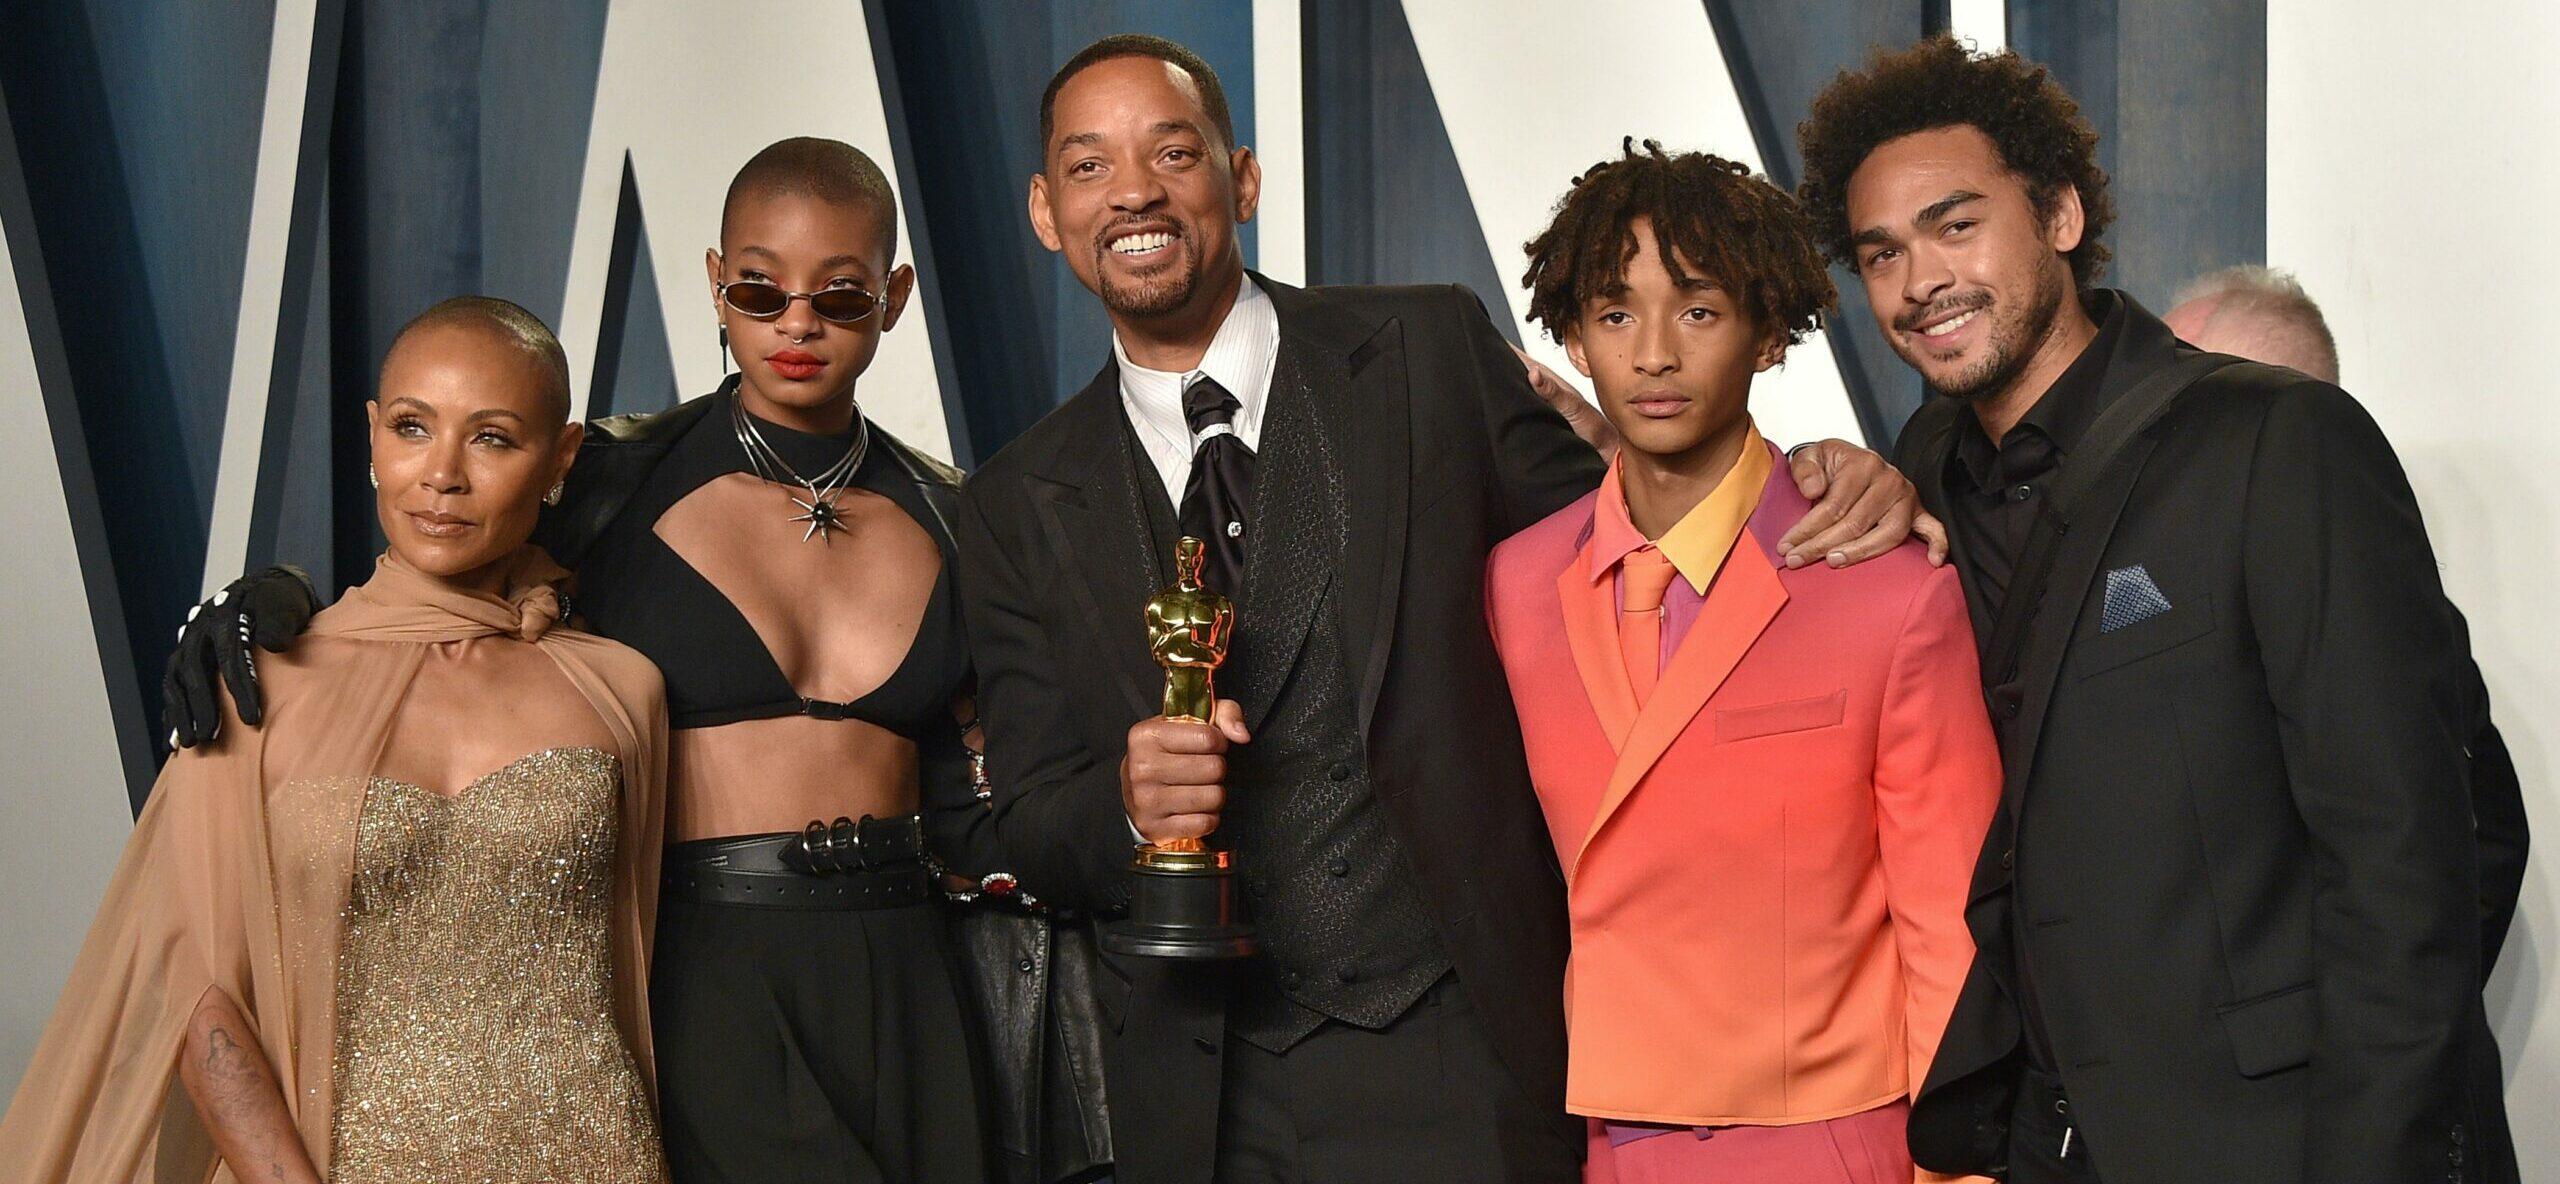 Will Smith’s Kids ‘Relieved’ That Jada Pinkett Smith Separation Is Now Public